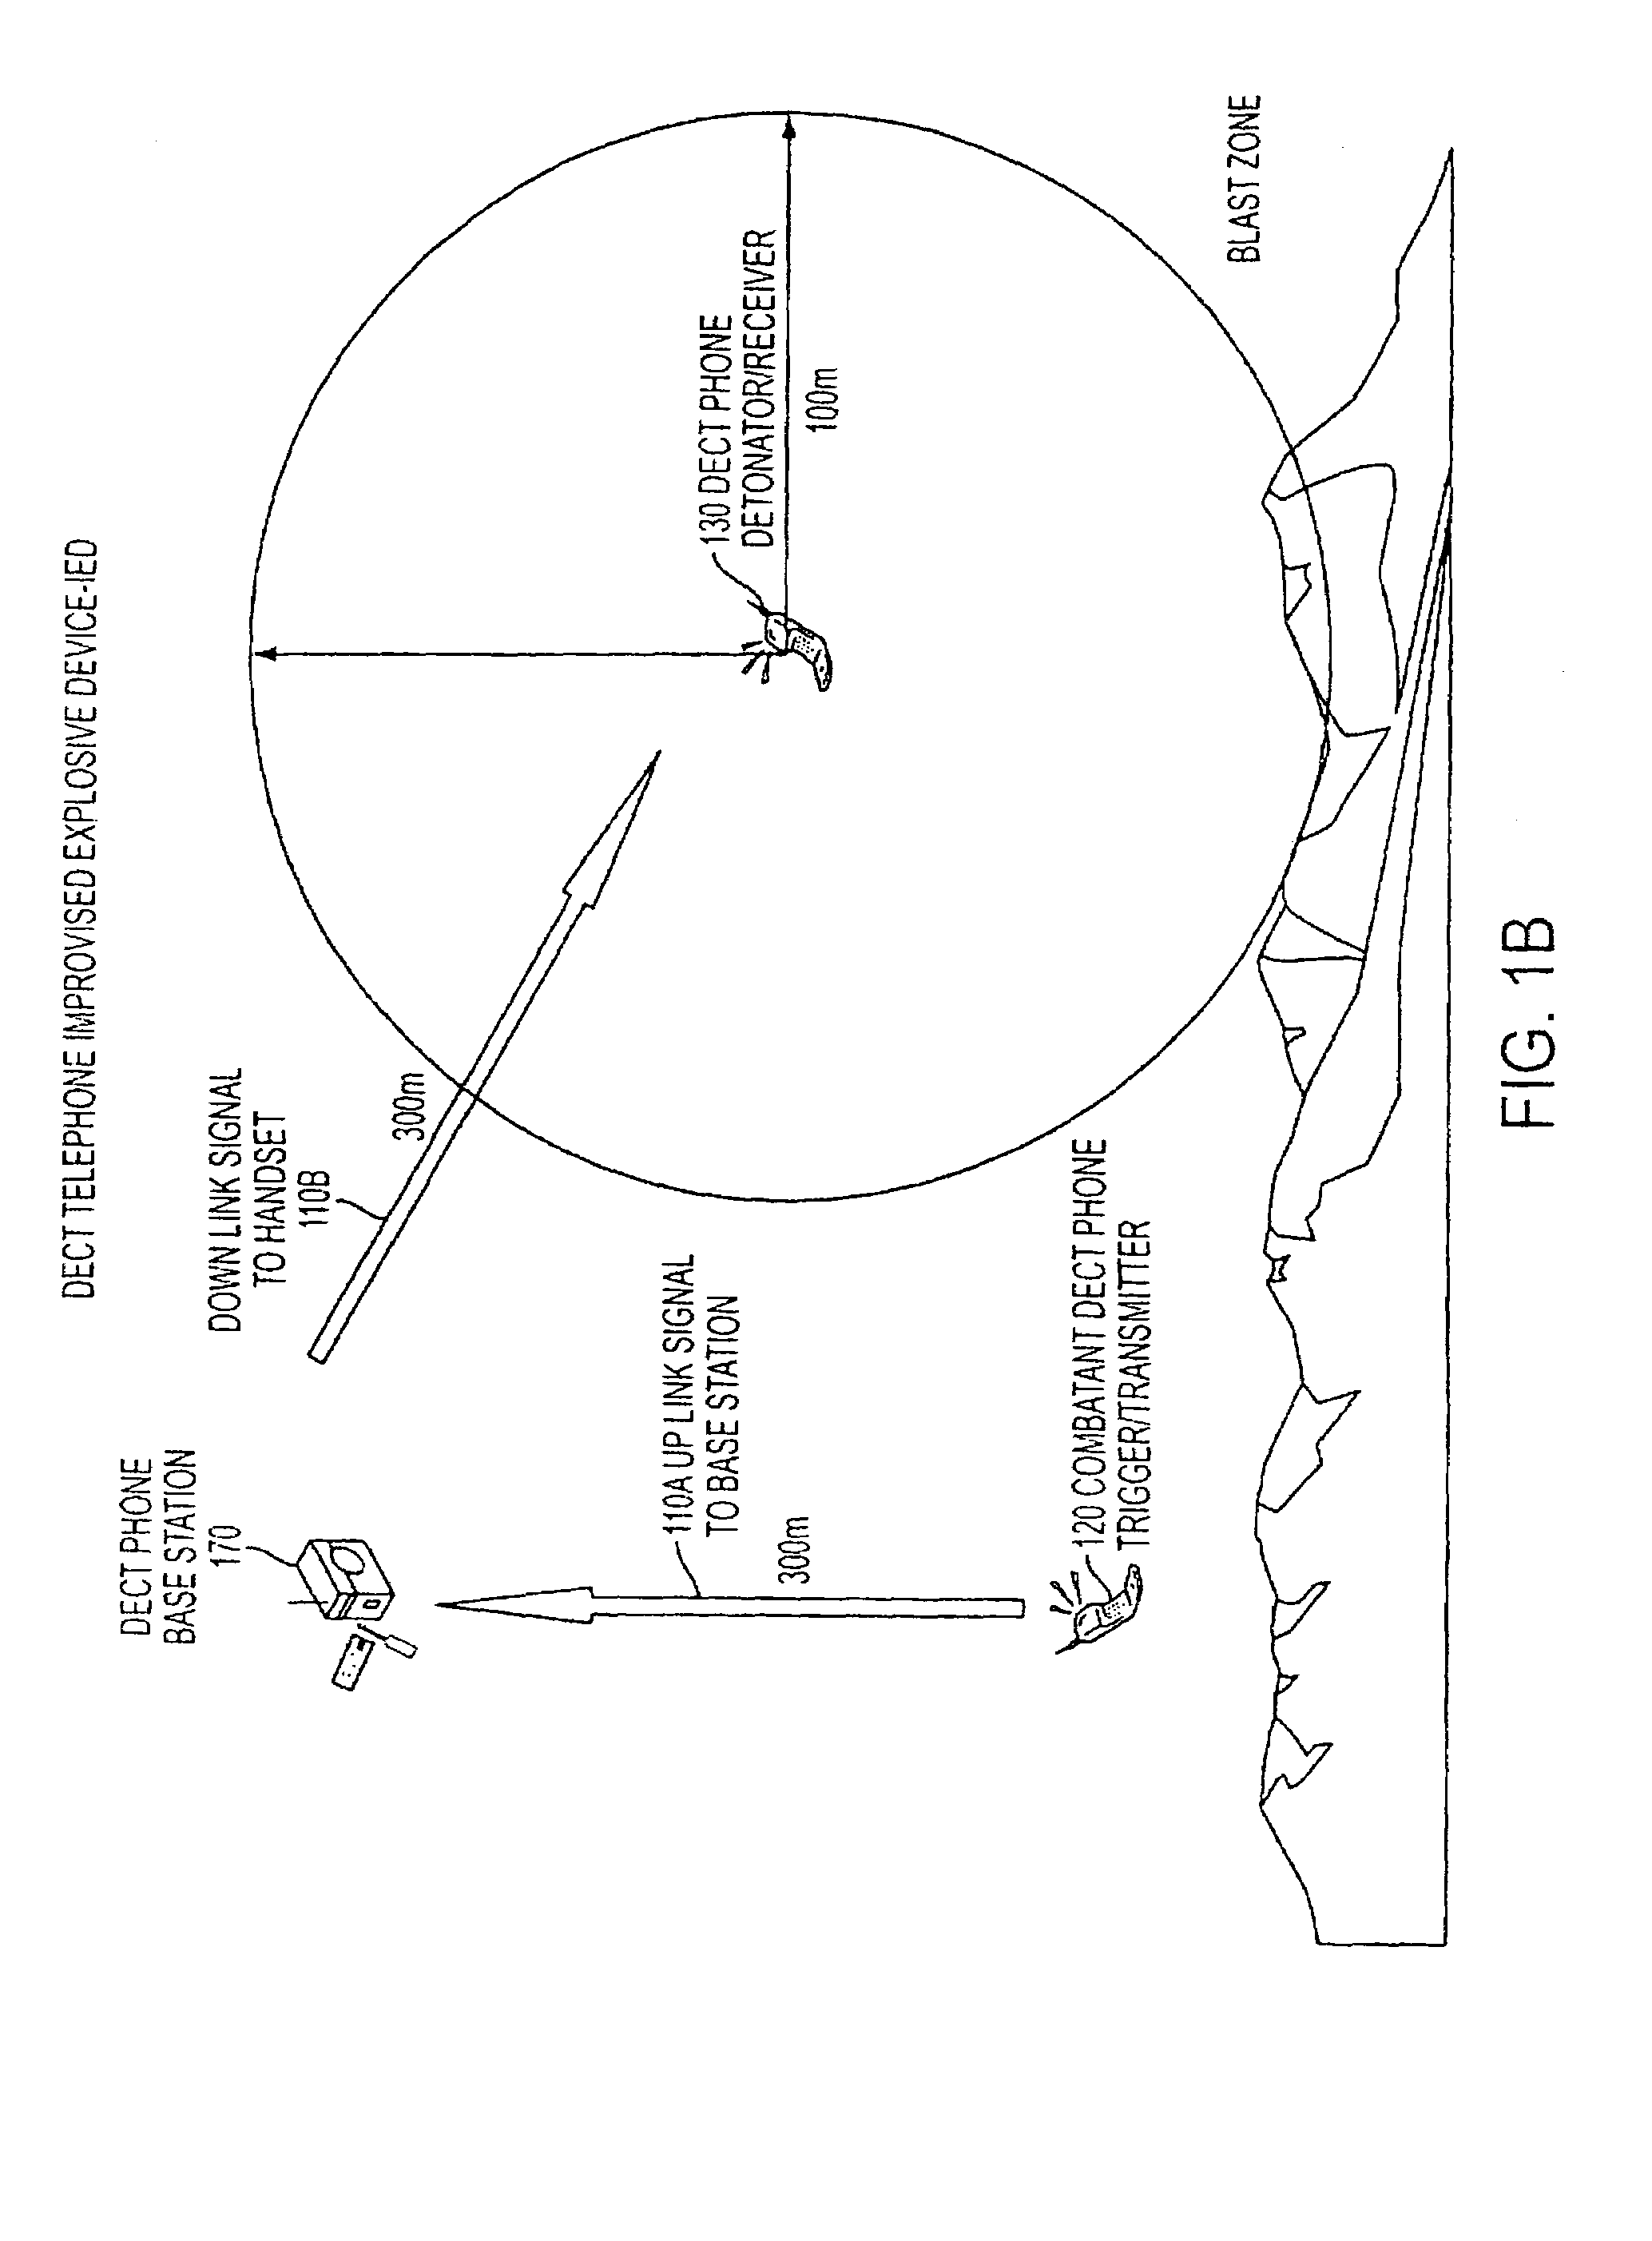 System and method for suppressing radio frequency transmissions